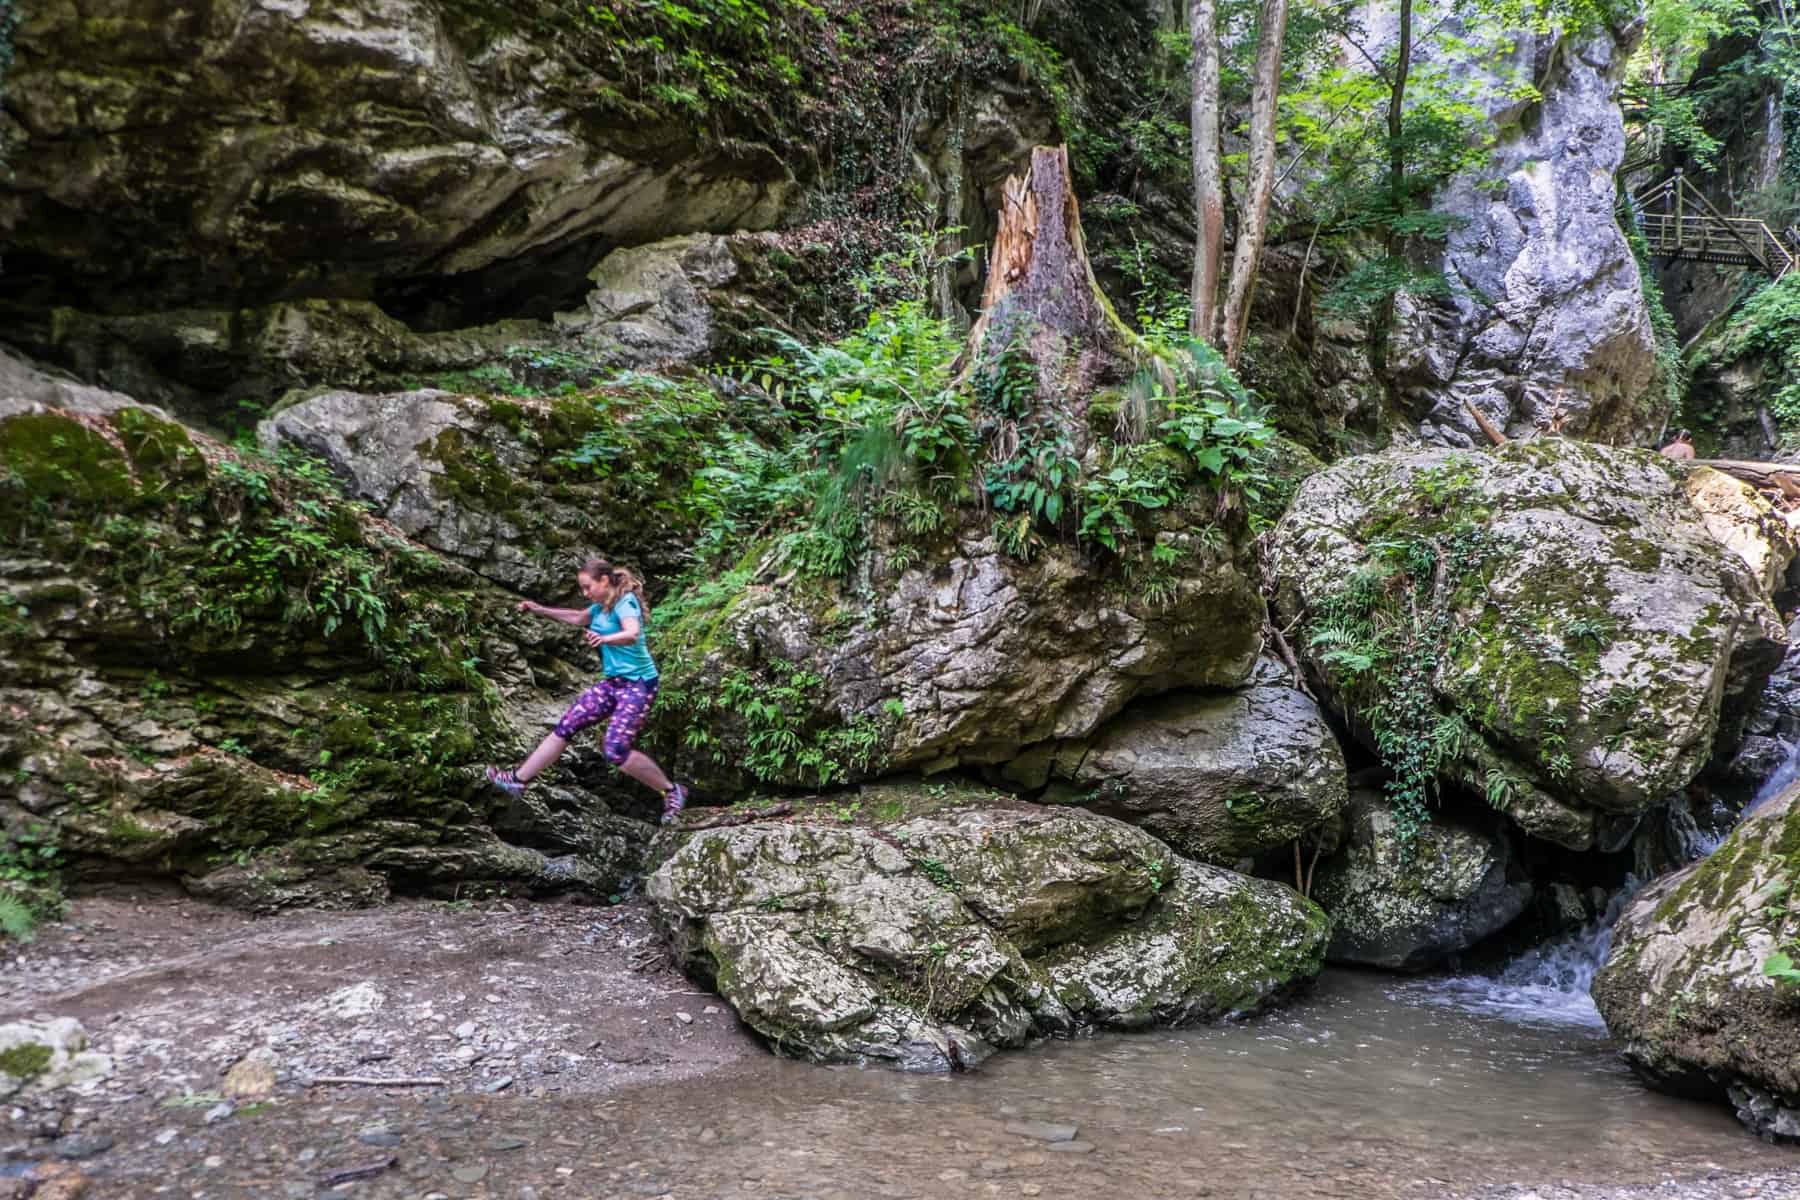 A woman jumps off a large rock in a woodland canyon in Graz Austria